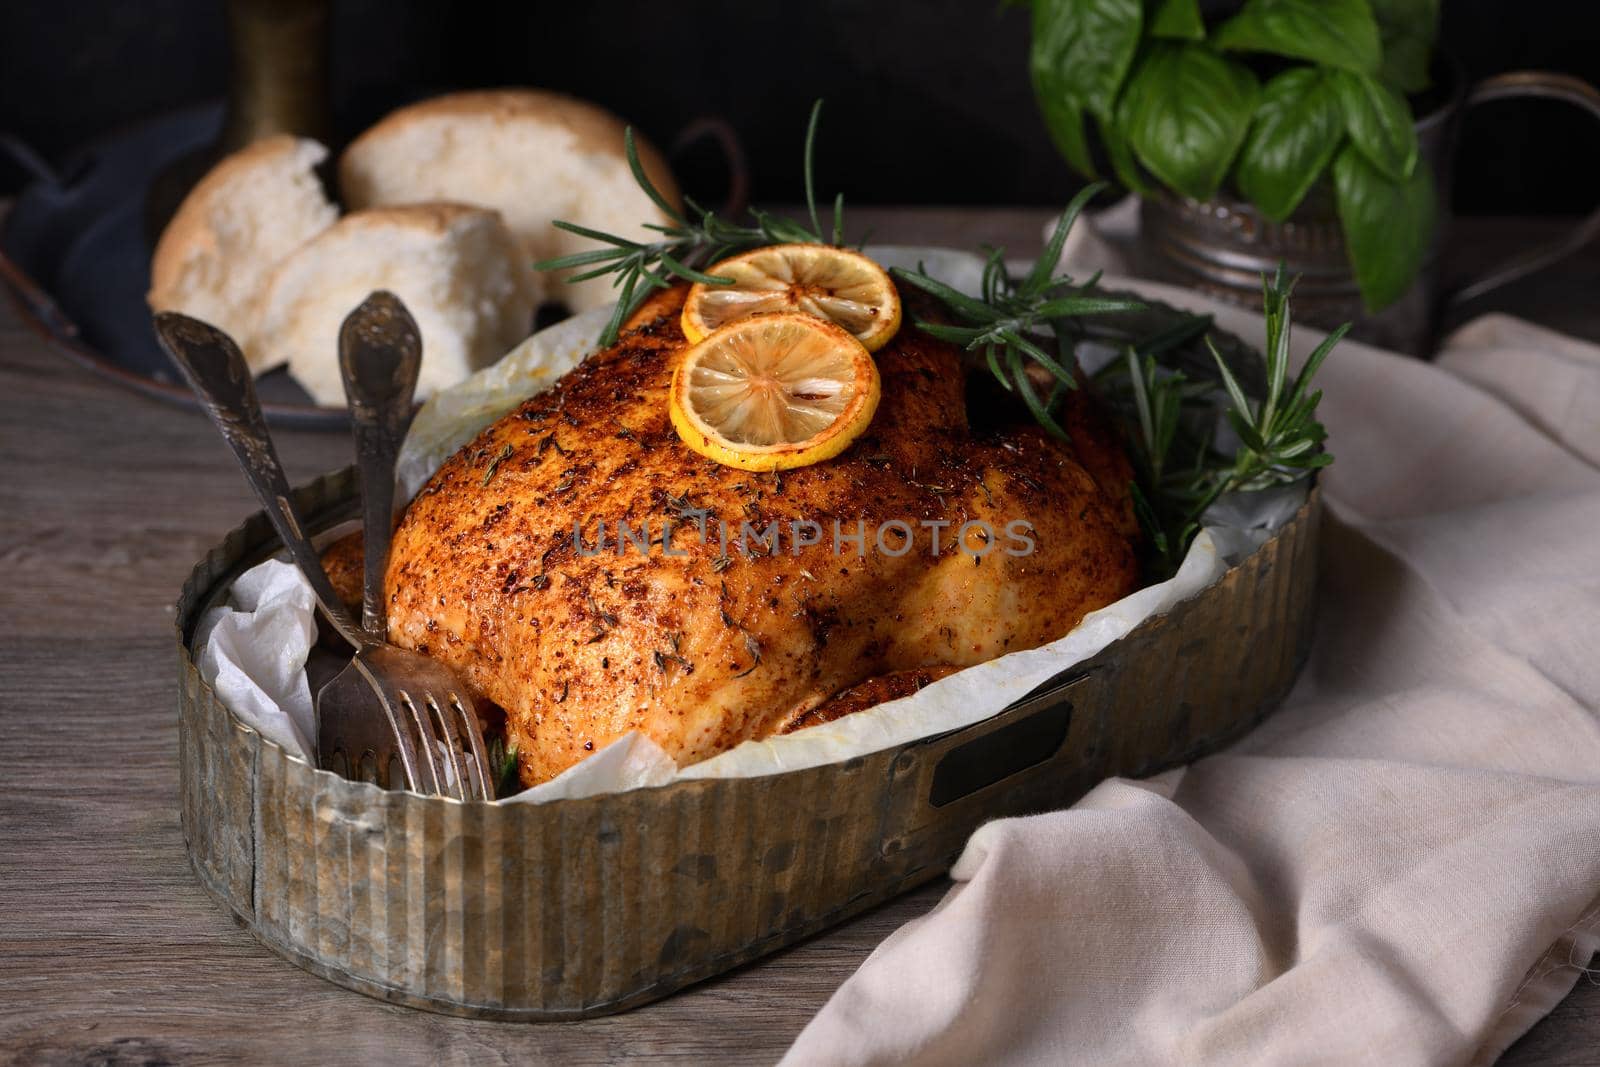 Baked whole chicken in a tray by Apolonia